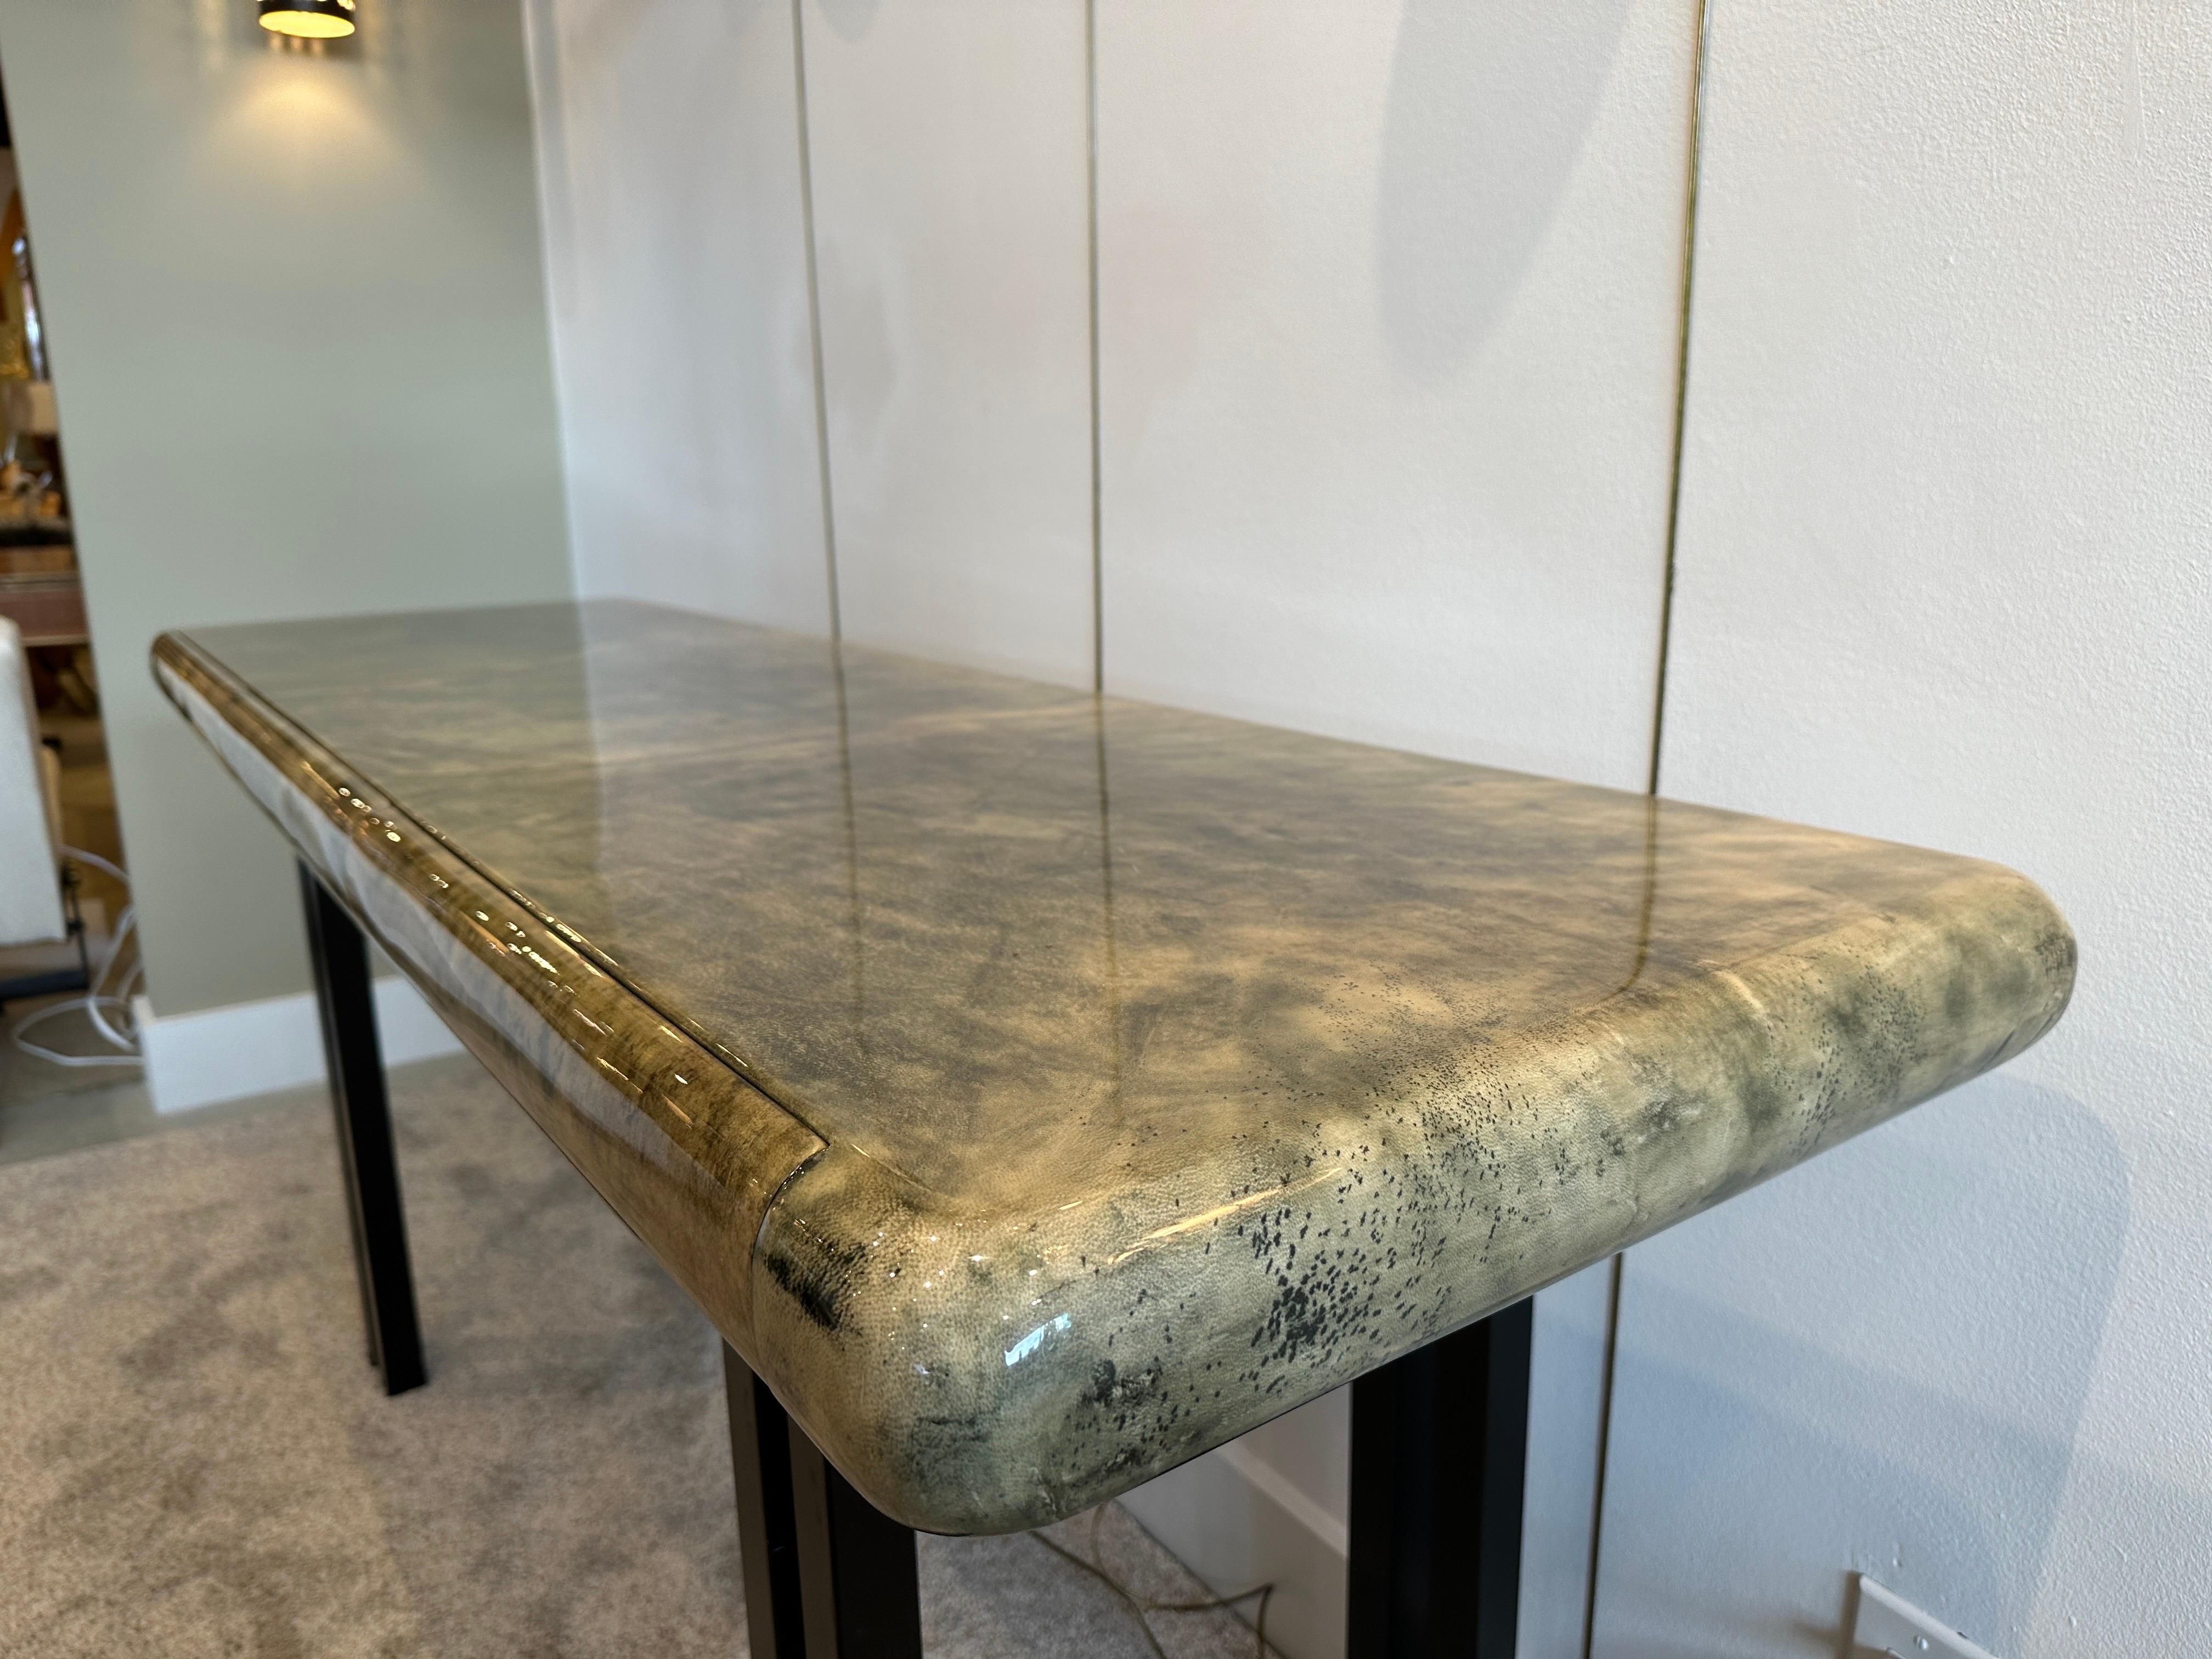 Vintage Aldo Tura Green Lacquered Goatskin Console Table In Good Condition For Sale In East Hampton, NY